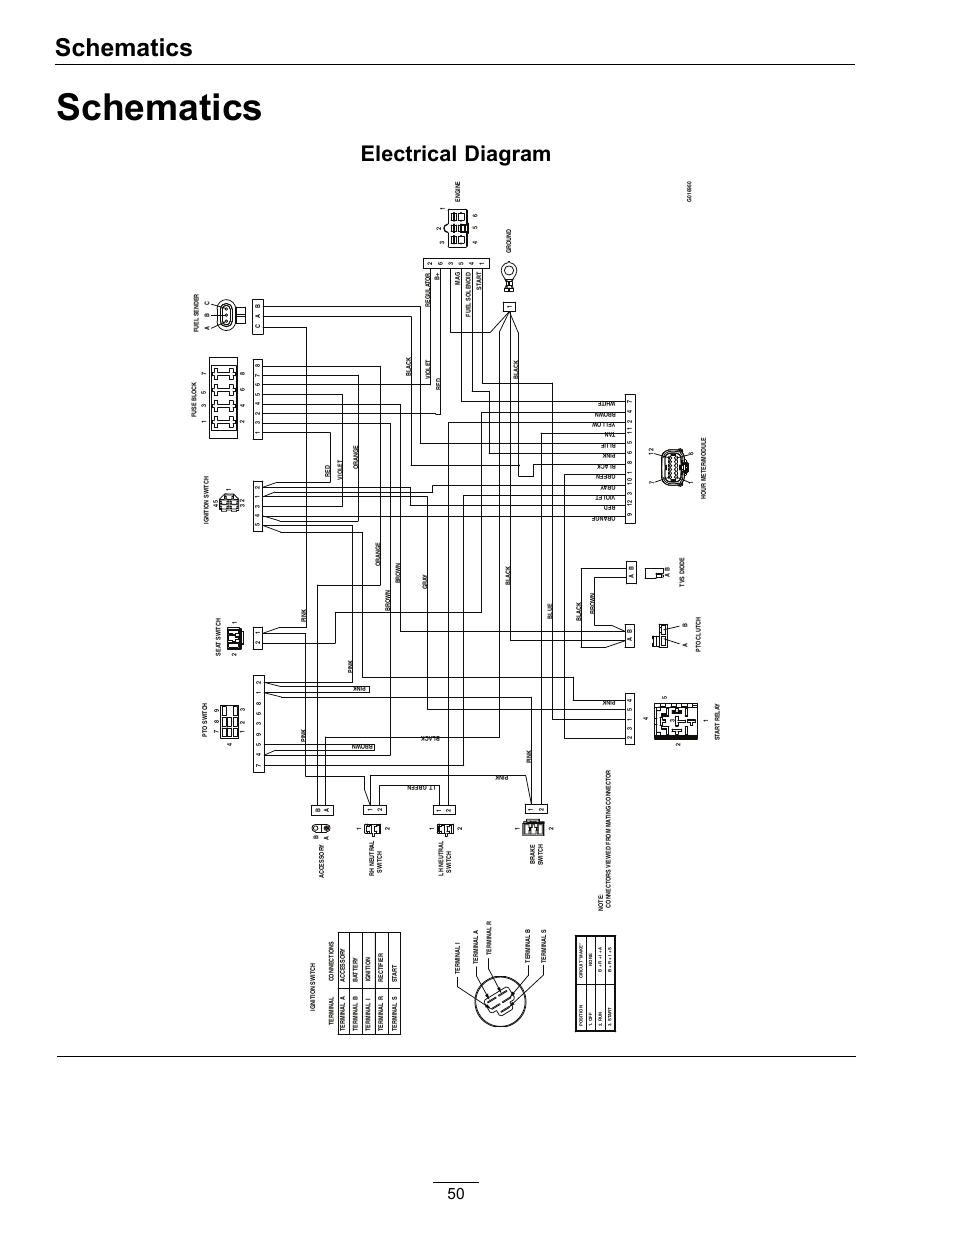 Square D Lighting Contactor Wiring Diagram 8903